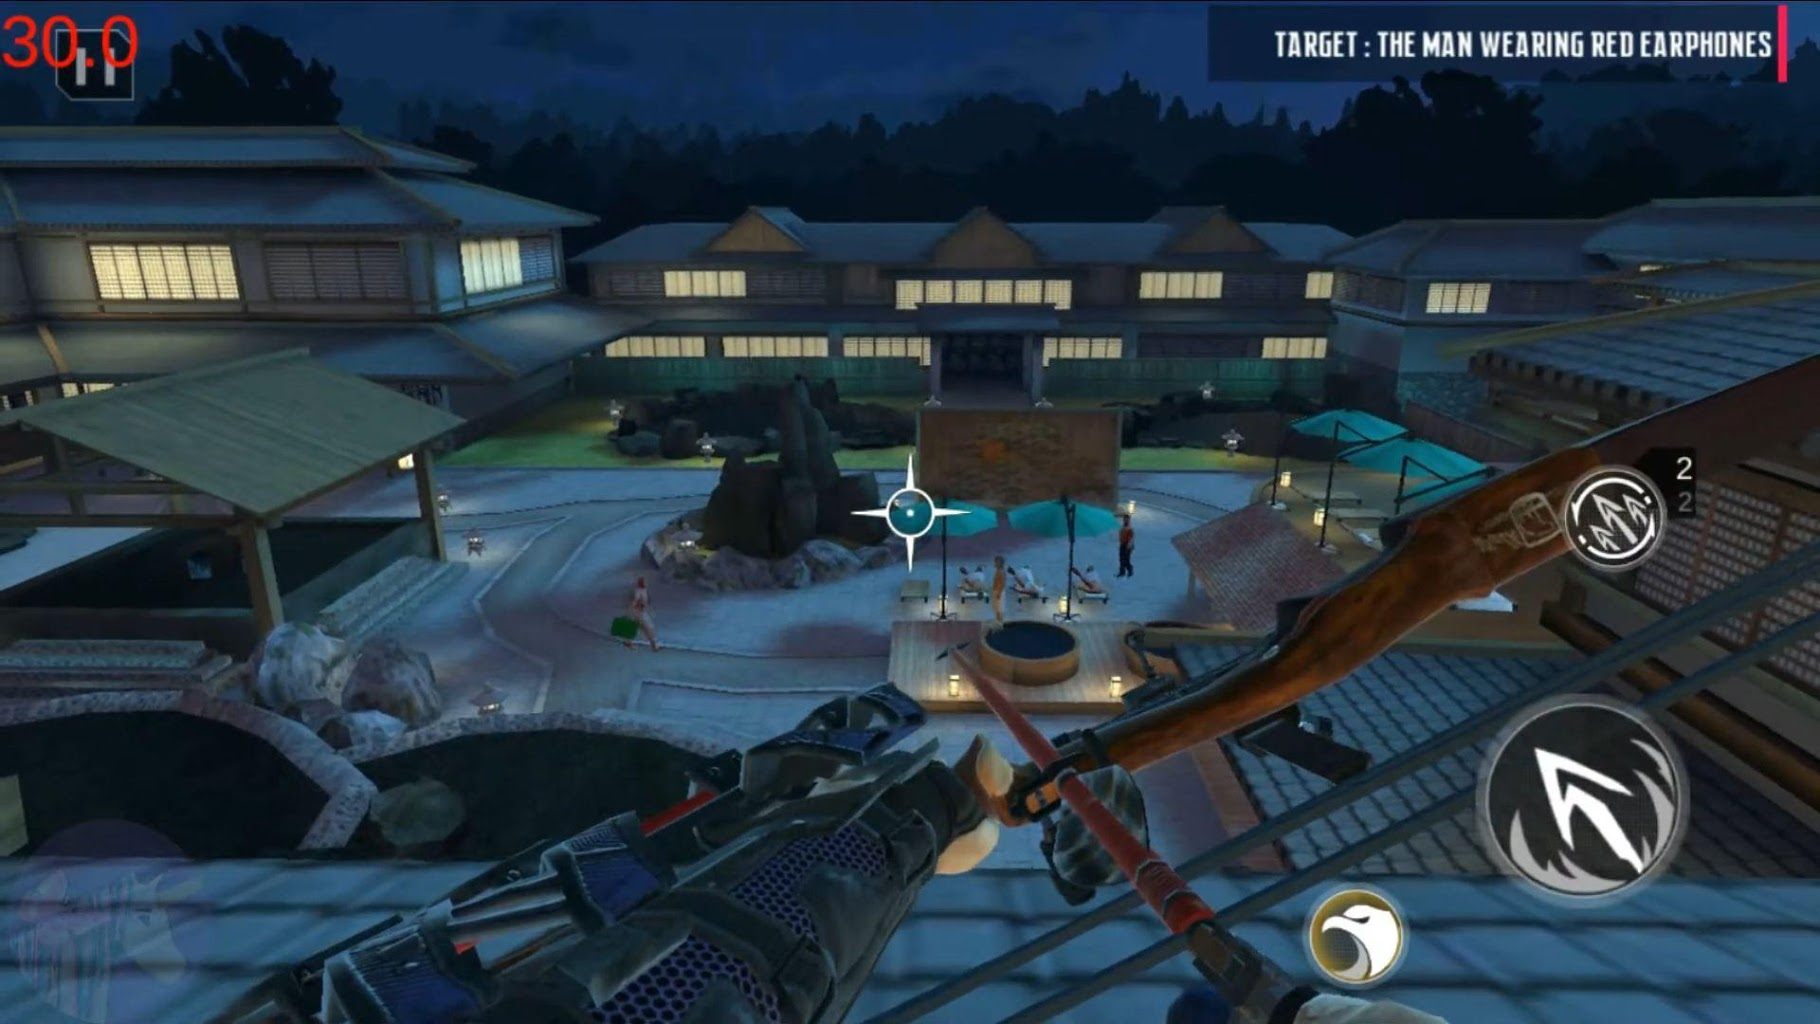 Learn How To Track Targets In Ninja’s Creed: 3D Sniper Shooting Assassin Game